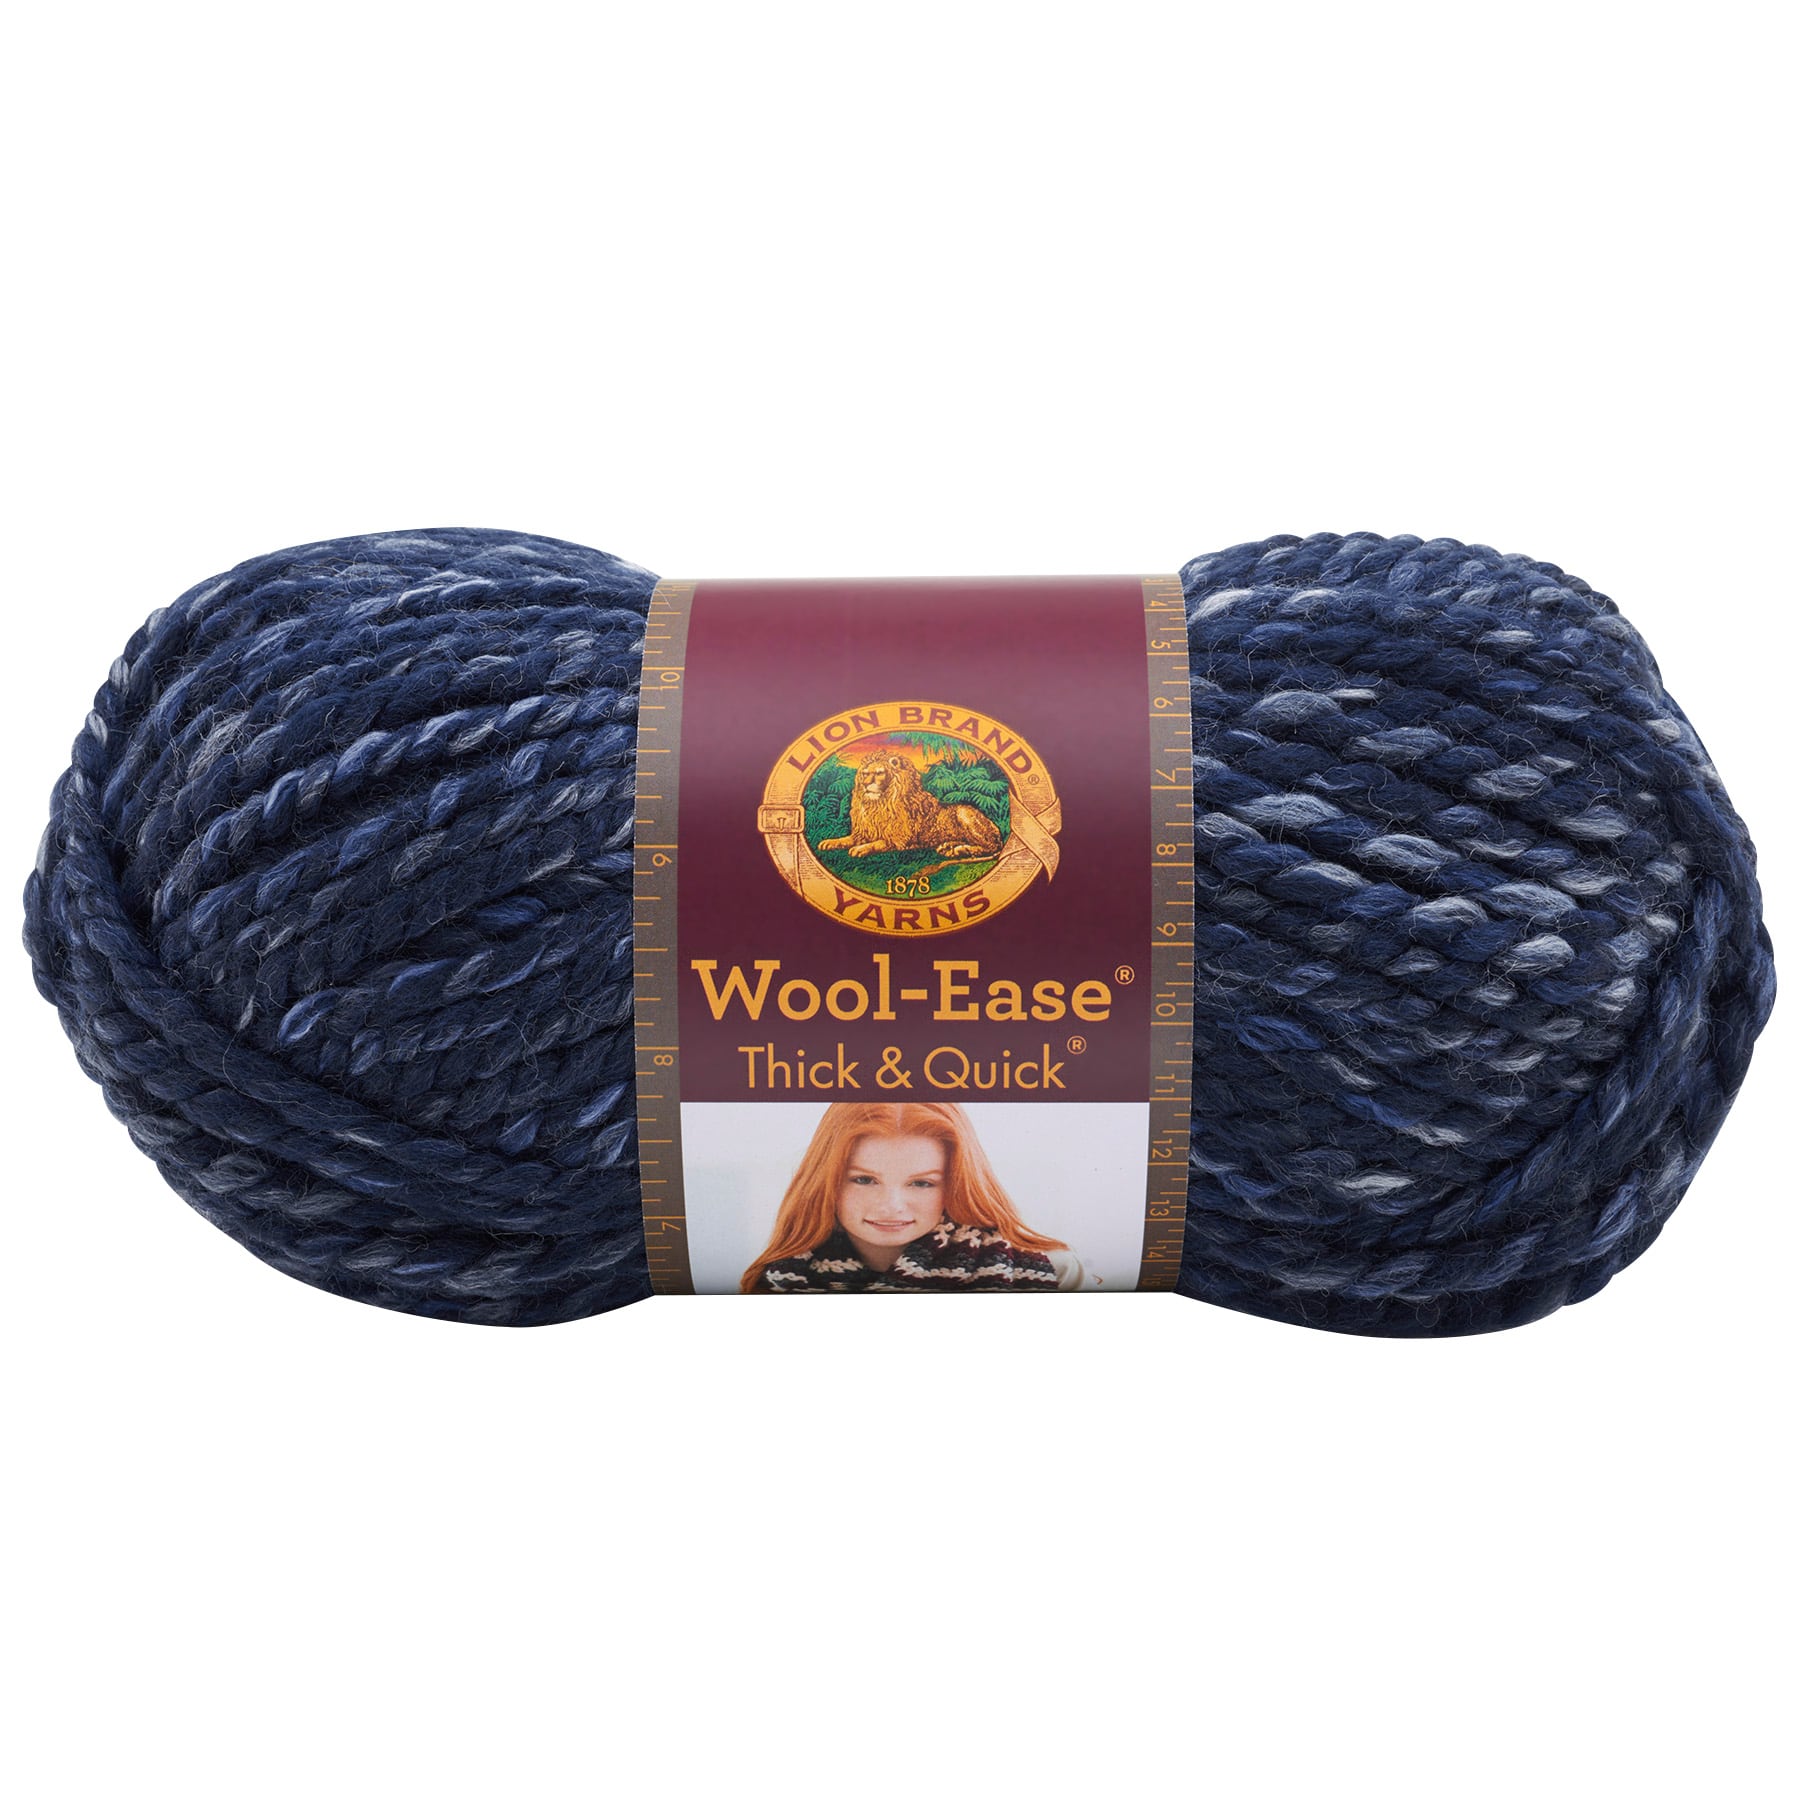 Lion Brand Wool Ease Thick & Quick Yarn, Lot of 2 Skeins, 5 oz